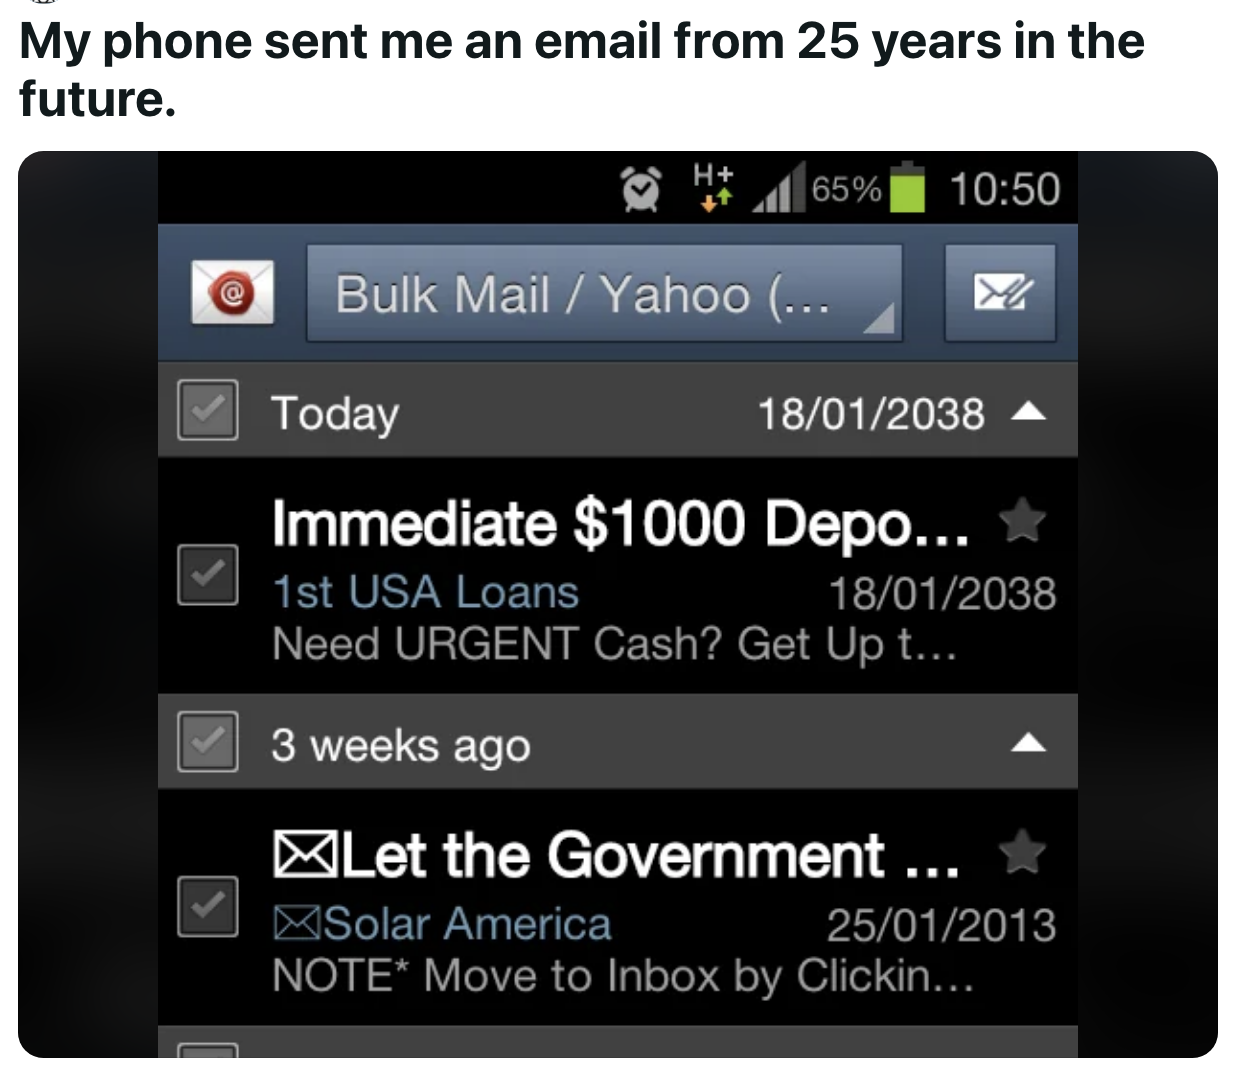 my phone sent me an email from 25 years in the future